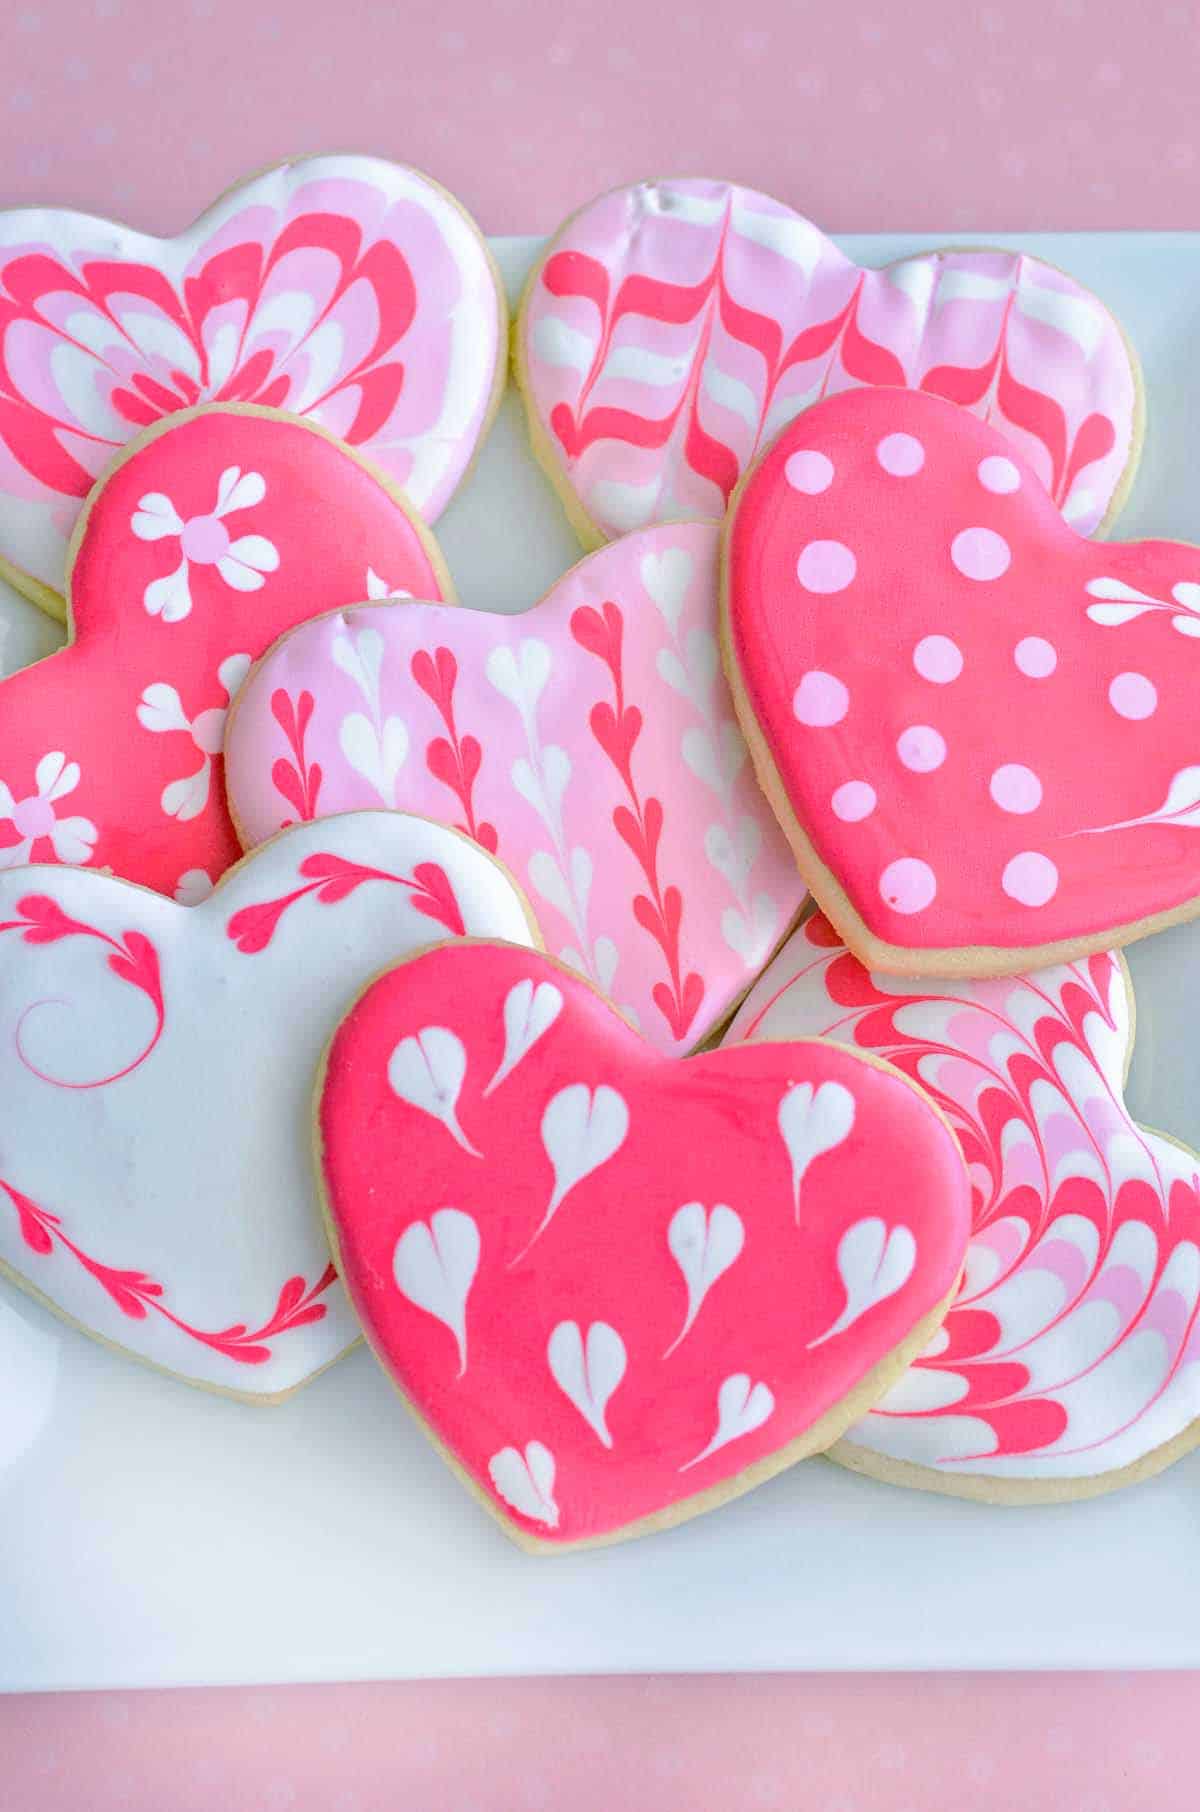 heart shaped cookies decorated for valentines day